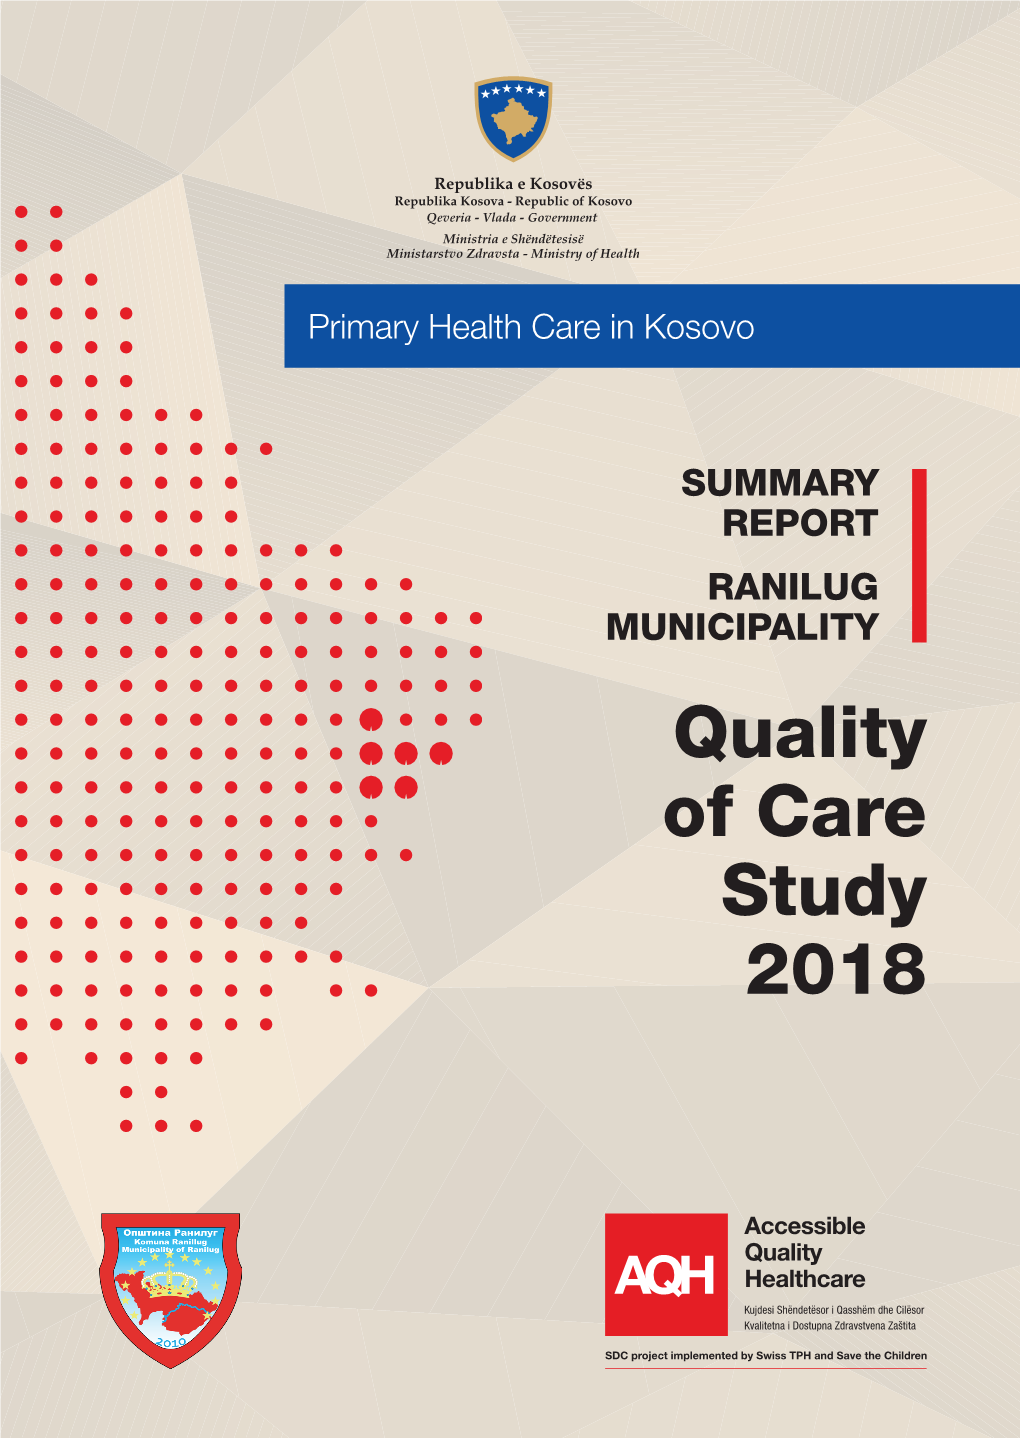 Quality of Care Study 2018